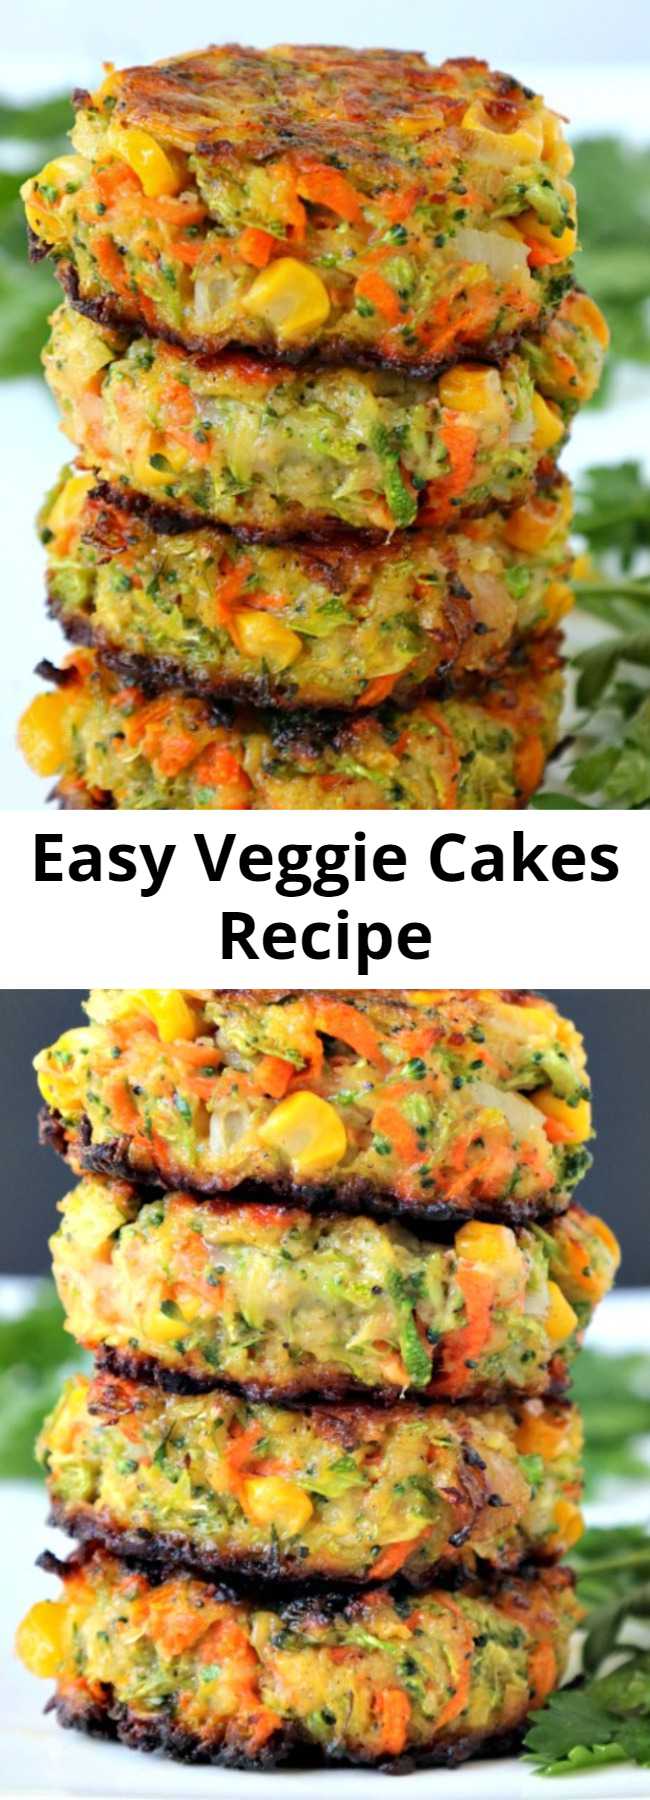 Easy Veggie Cakes Recipe - Crispy, easy veggie cakes made with grated vegetables – carrots, zucchini, broccoli and corn. Great for lunches, side dish or your small picky eaters. Fluffy Vegetable Cakes perfect for a side or a Meatless Monday meal. #vegetablefritters #veggiecakes #vegetablecake